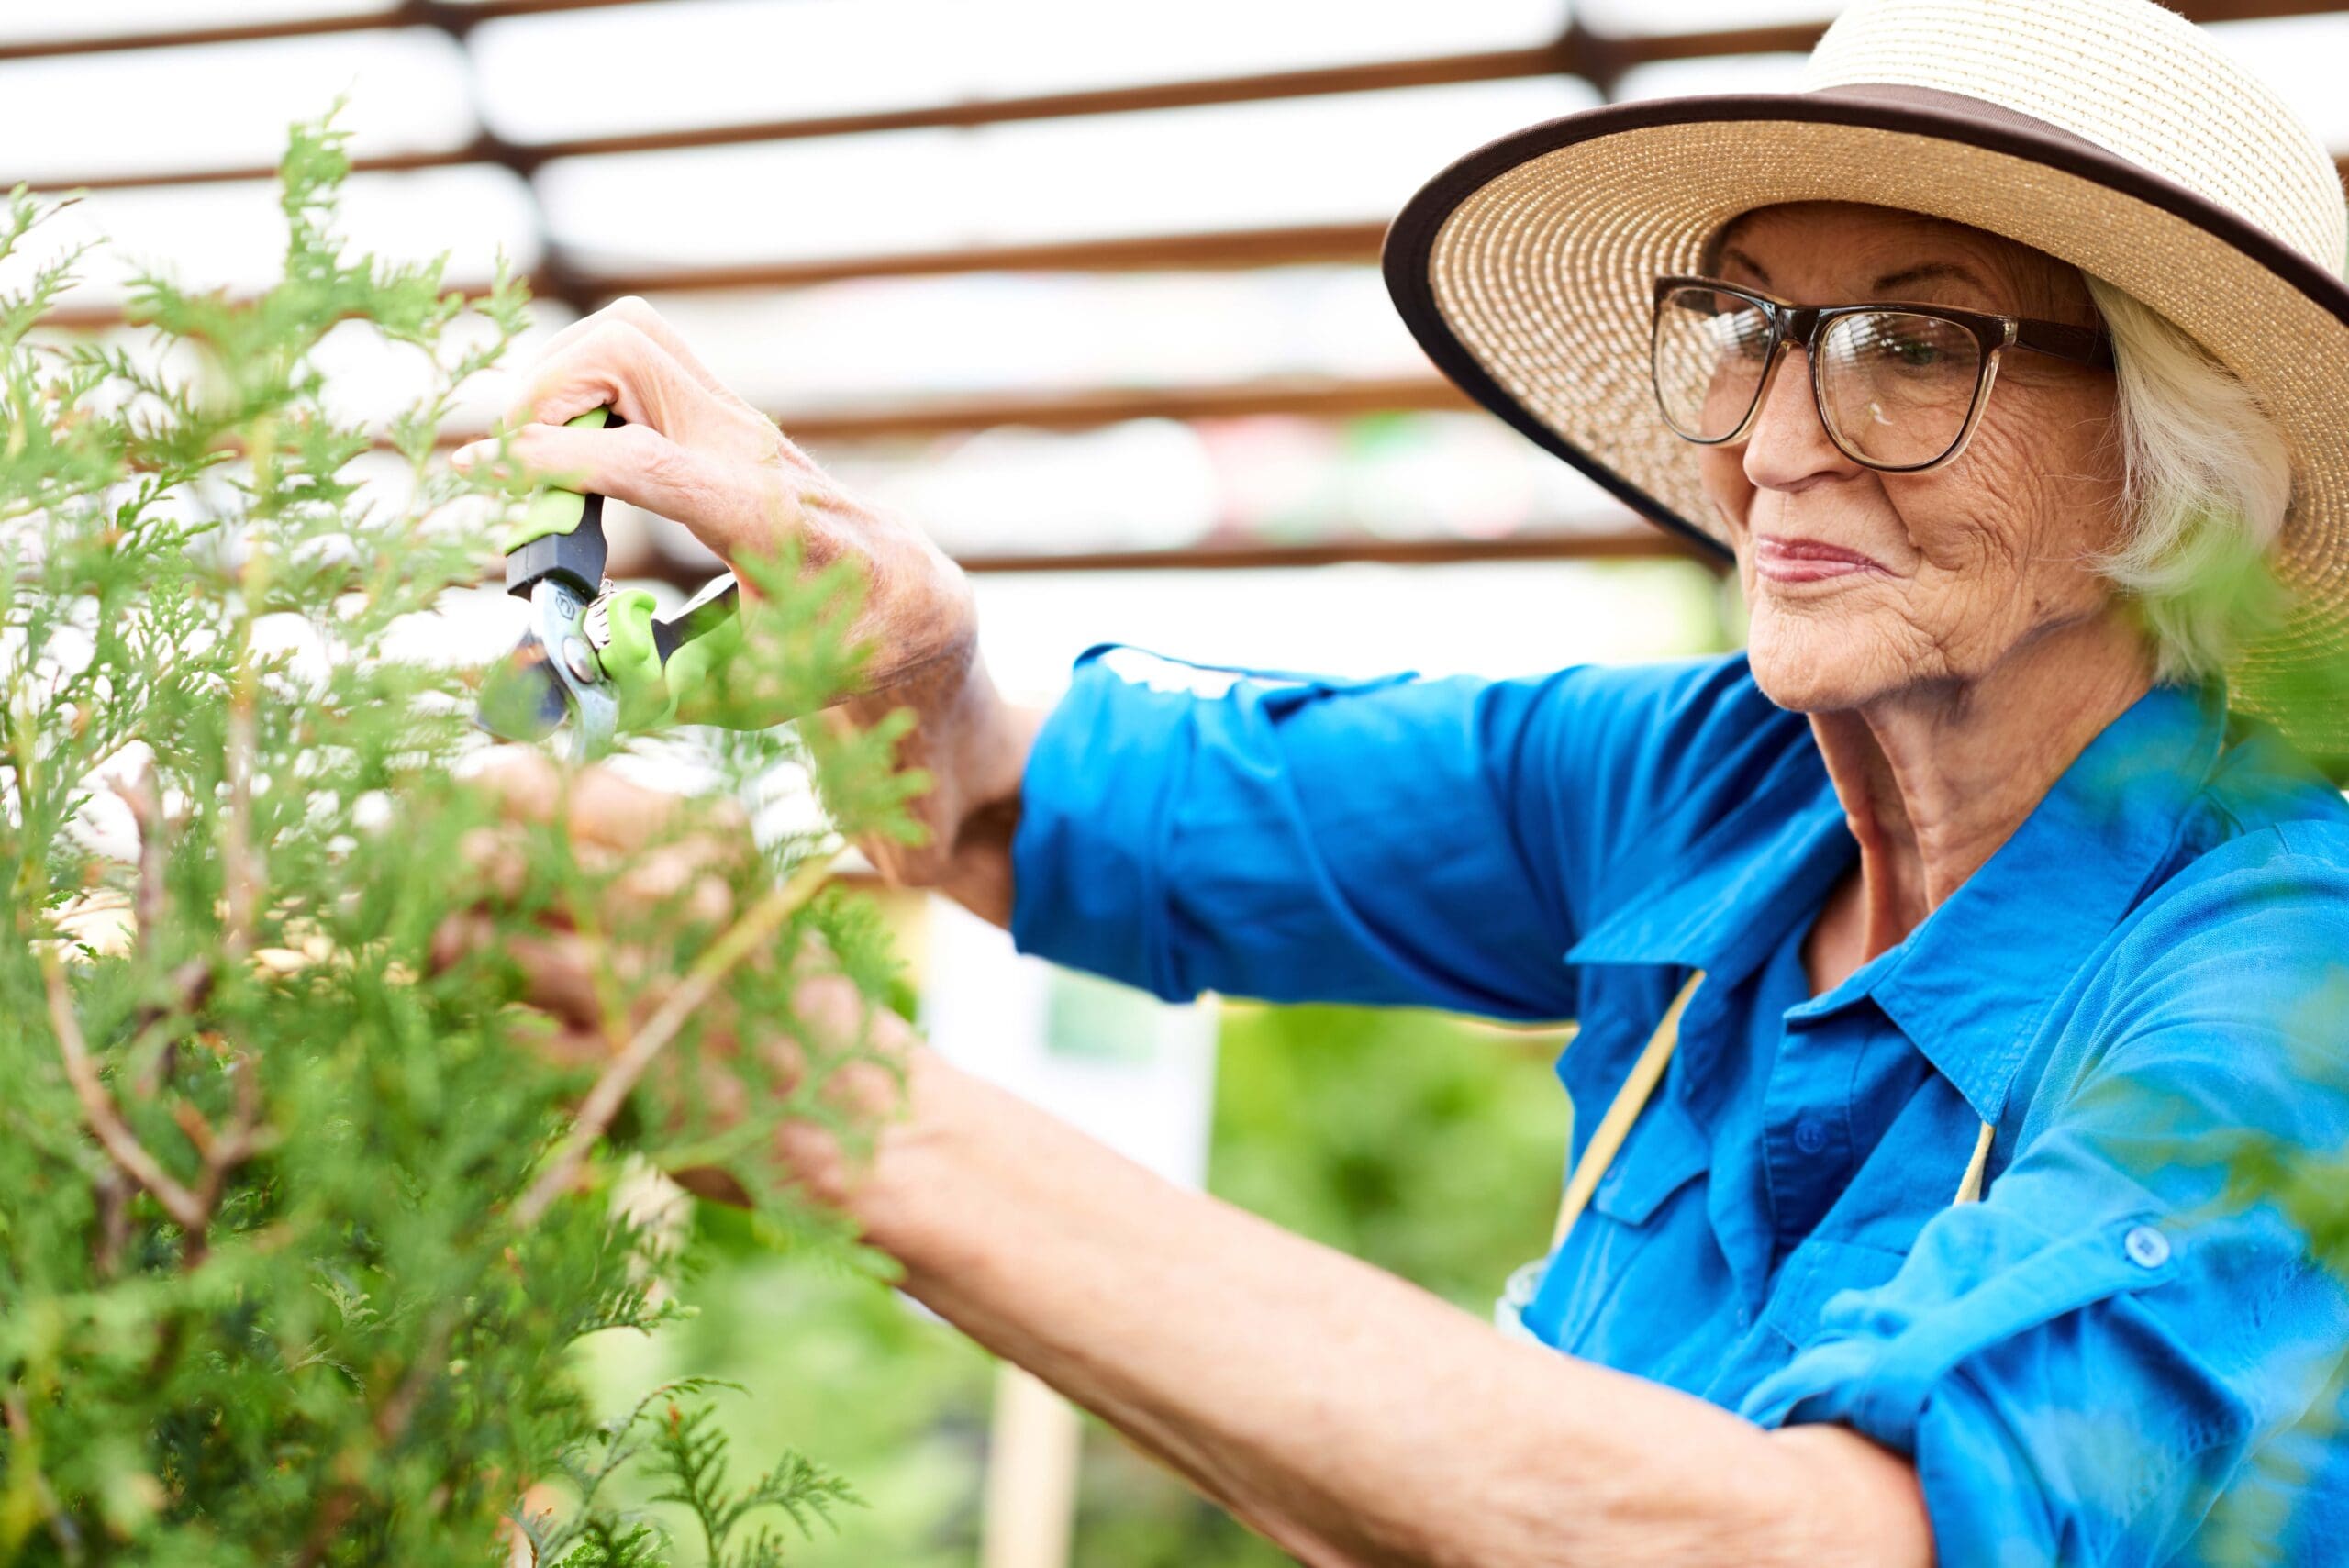 Smiling Senior Woman Caring for Plants